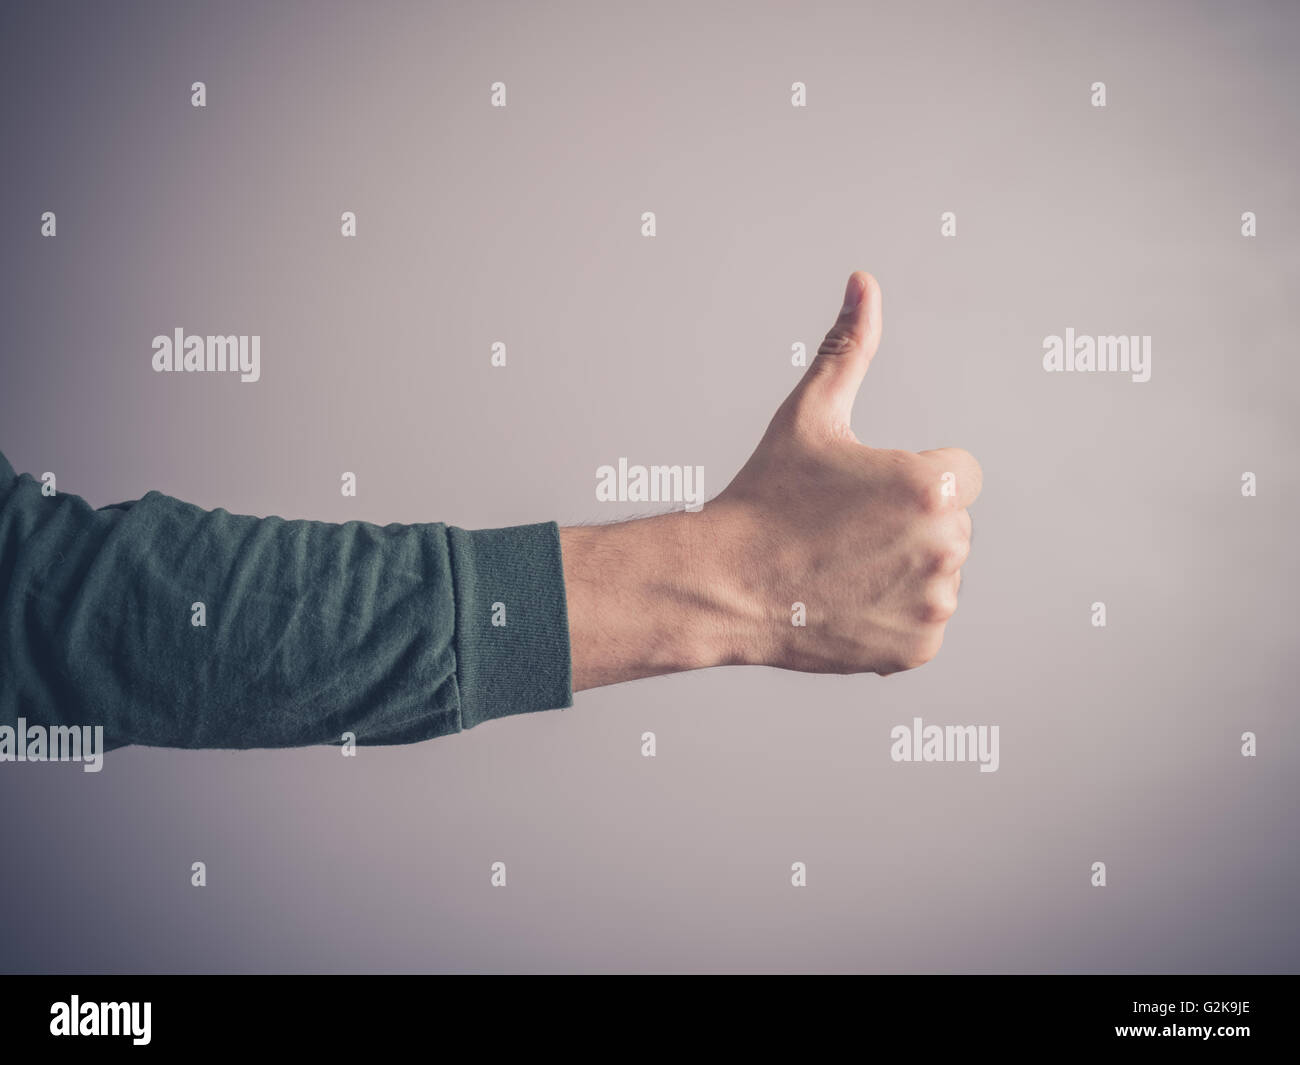 A young man wearing a green top is giving the thumbs up sign Stock Photo